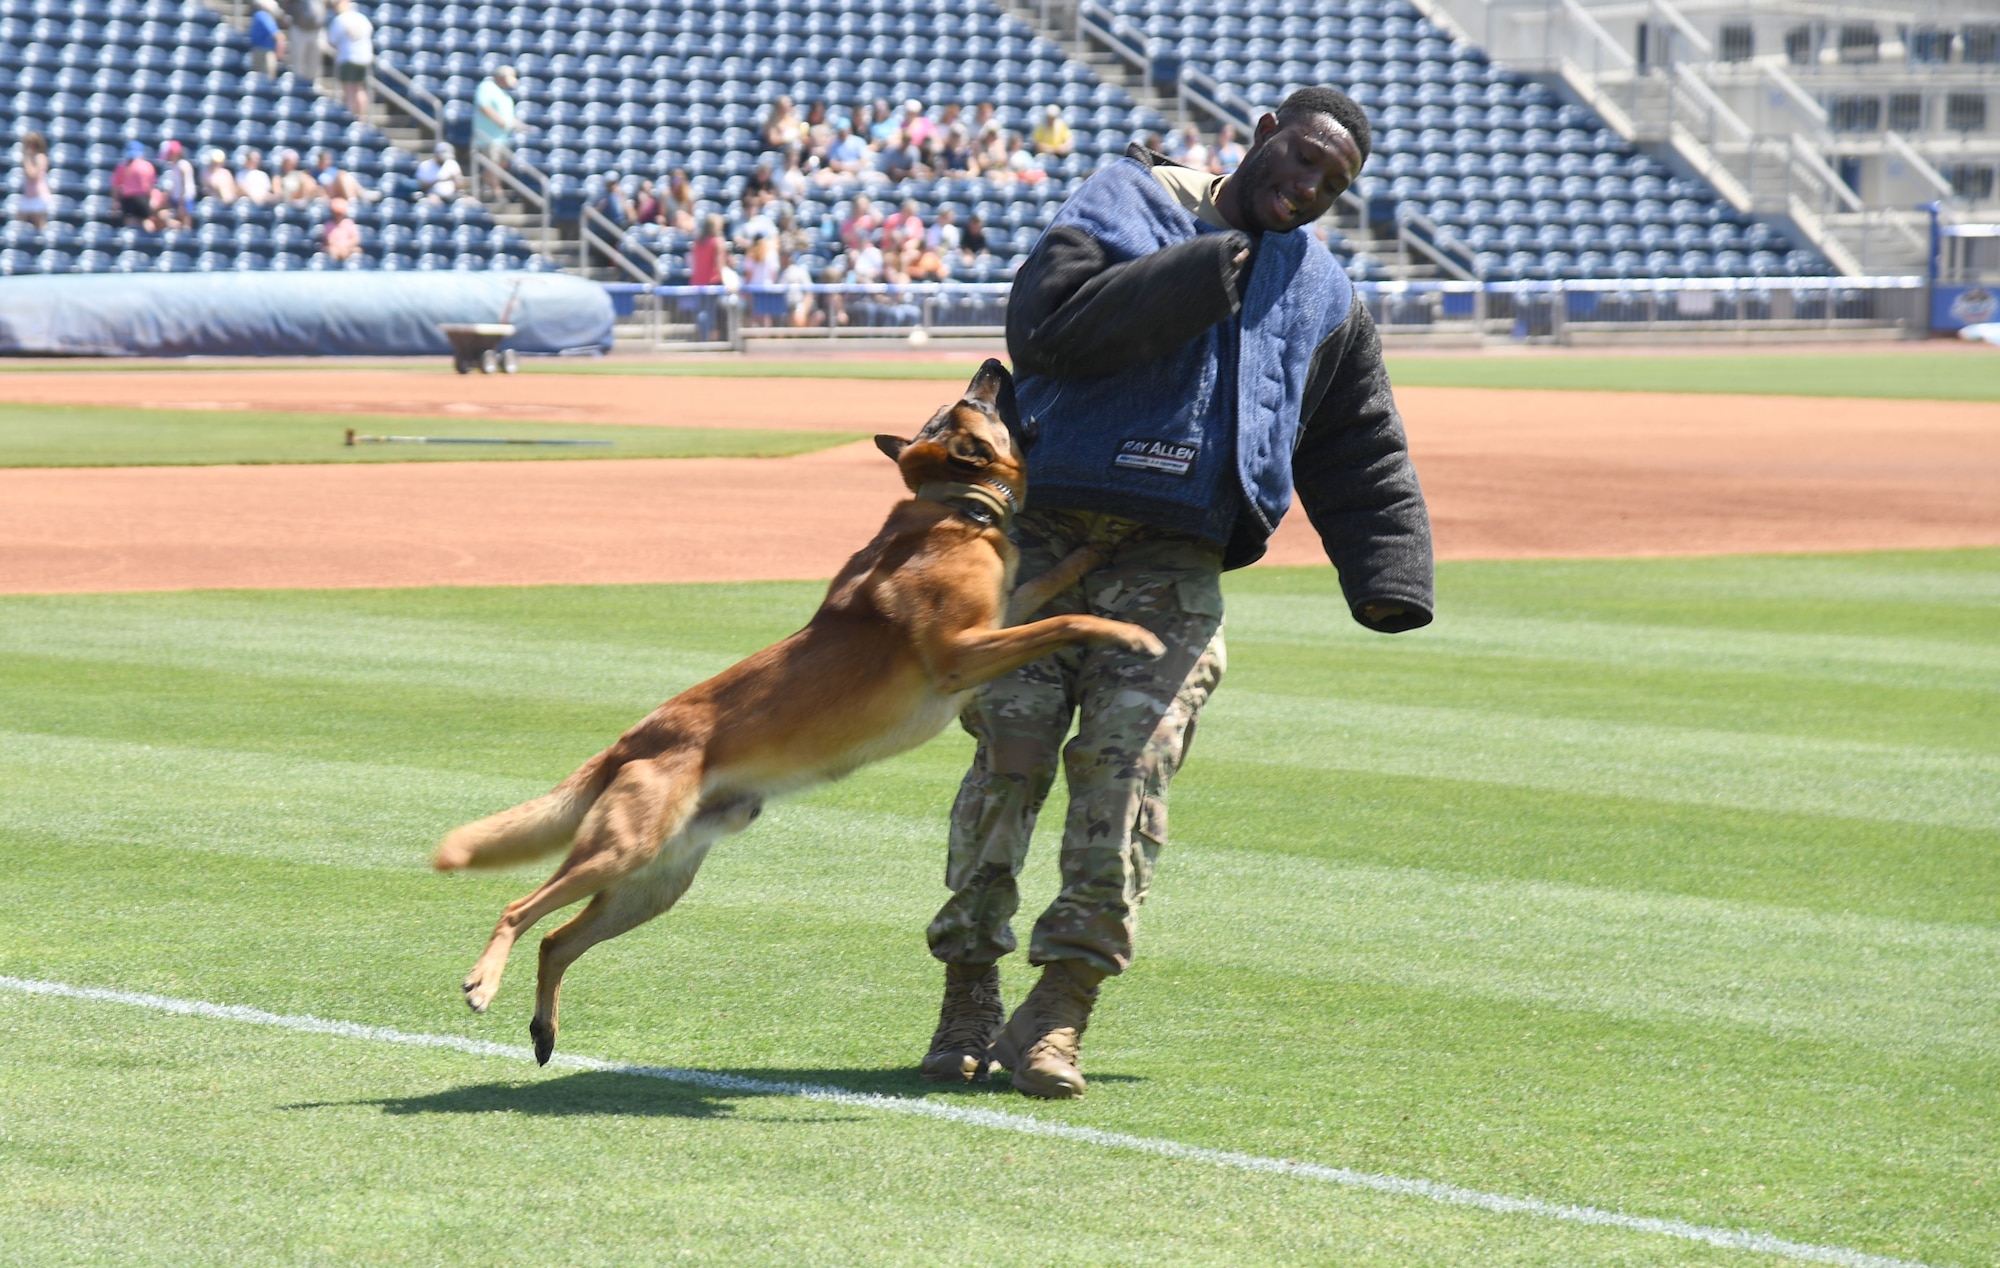 U.S. Air Force Senior Airman Victor Henderson, 81st Security Forces Squadron military working dog handler, and Victor, 81st SFS military working dog, participate in a military working dog demonstration during the Biloxi Shuckers Education Day event in Biloxi, Mississippi, May 11, 2022. The event allowed Airmen from the 81st Training Group to set up training equipment displays for local school-aged children to view during the Biloxi Shuckers' game. (U.S. Air Force photo by Kemberly Groue)